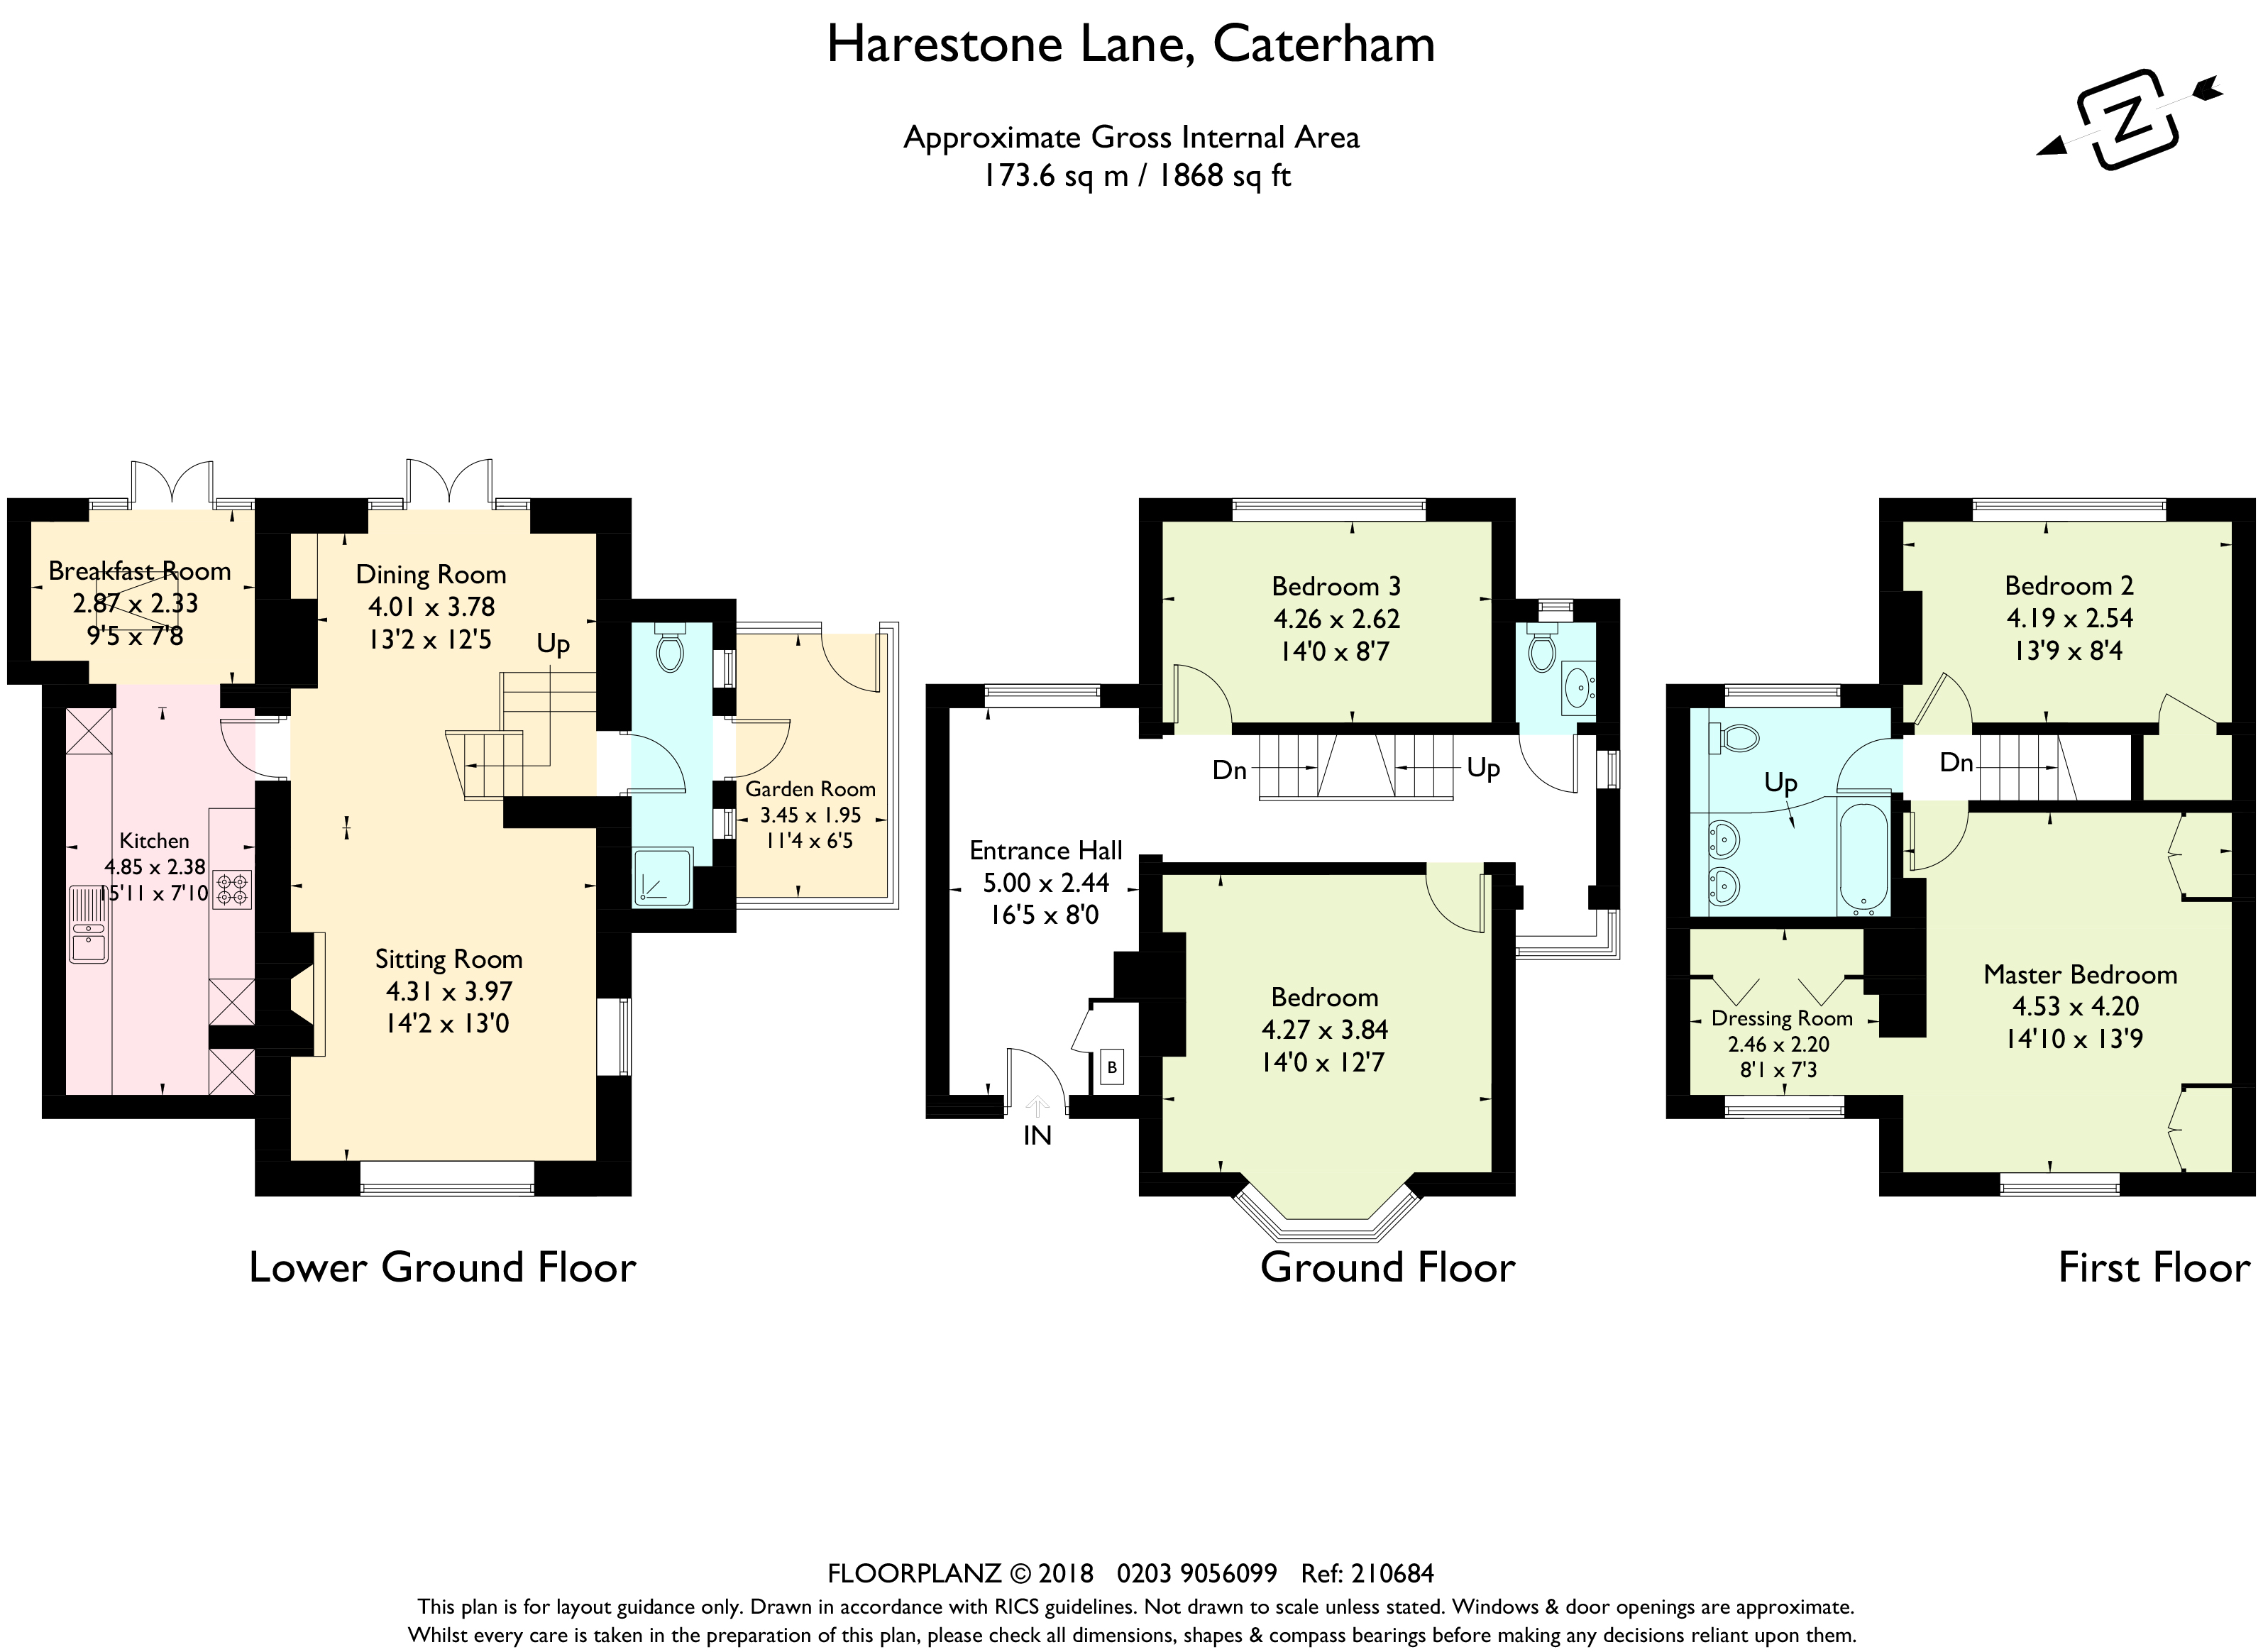 4 Bedrooms Semi-detached house to rent in Harestone Lane, Caterham CR3